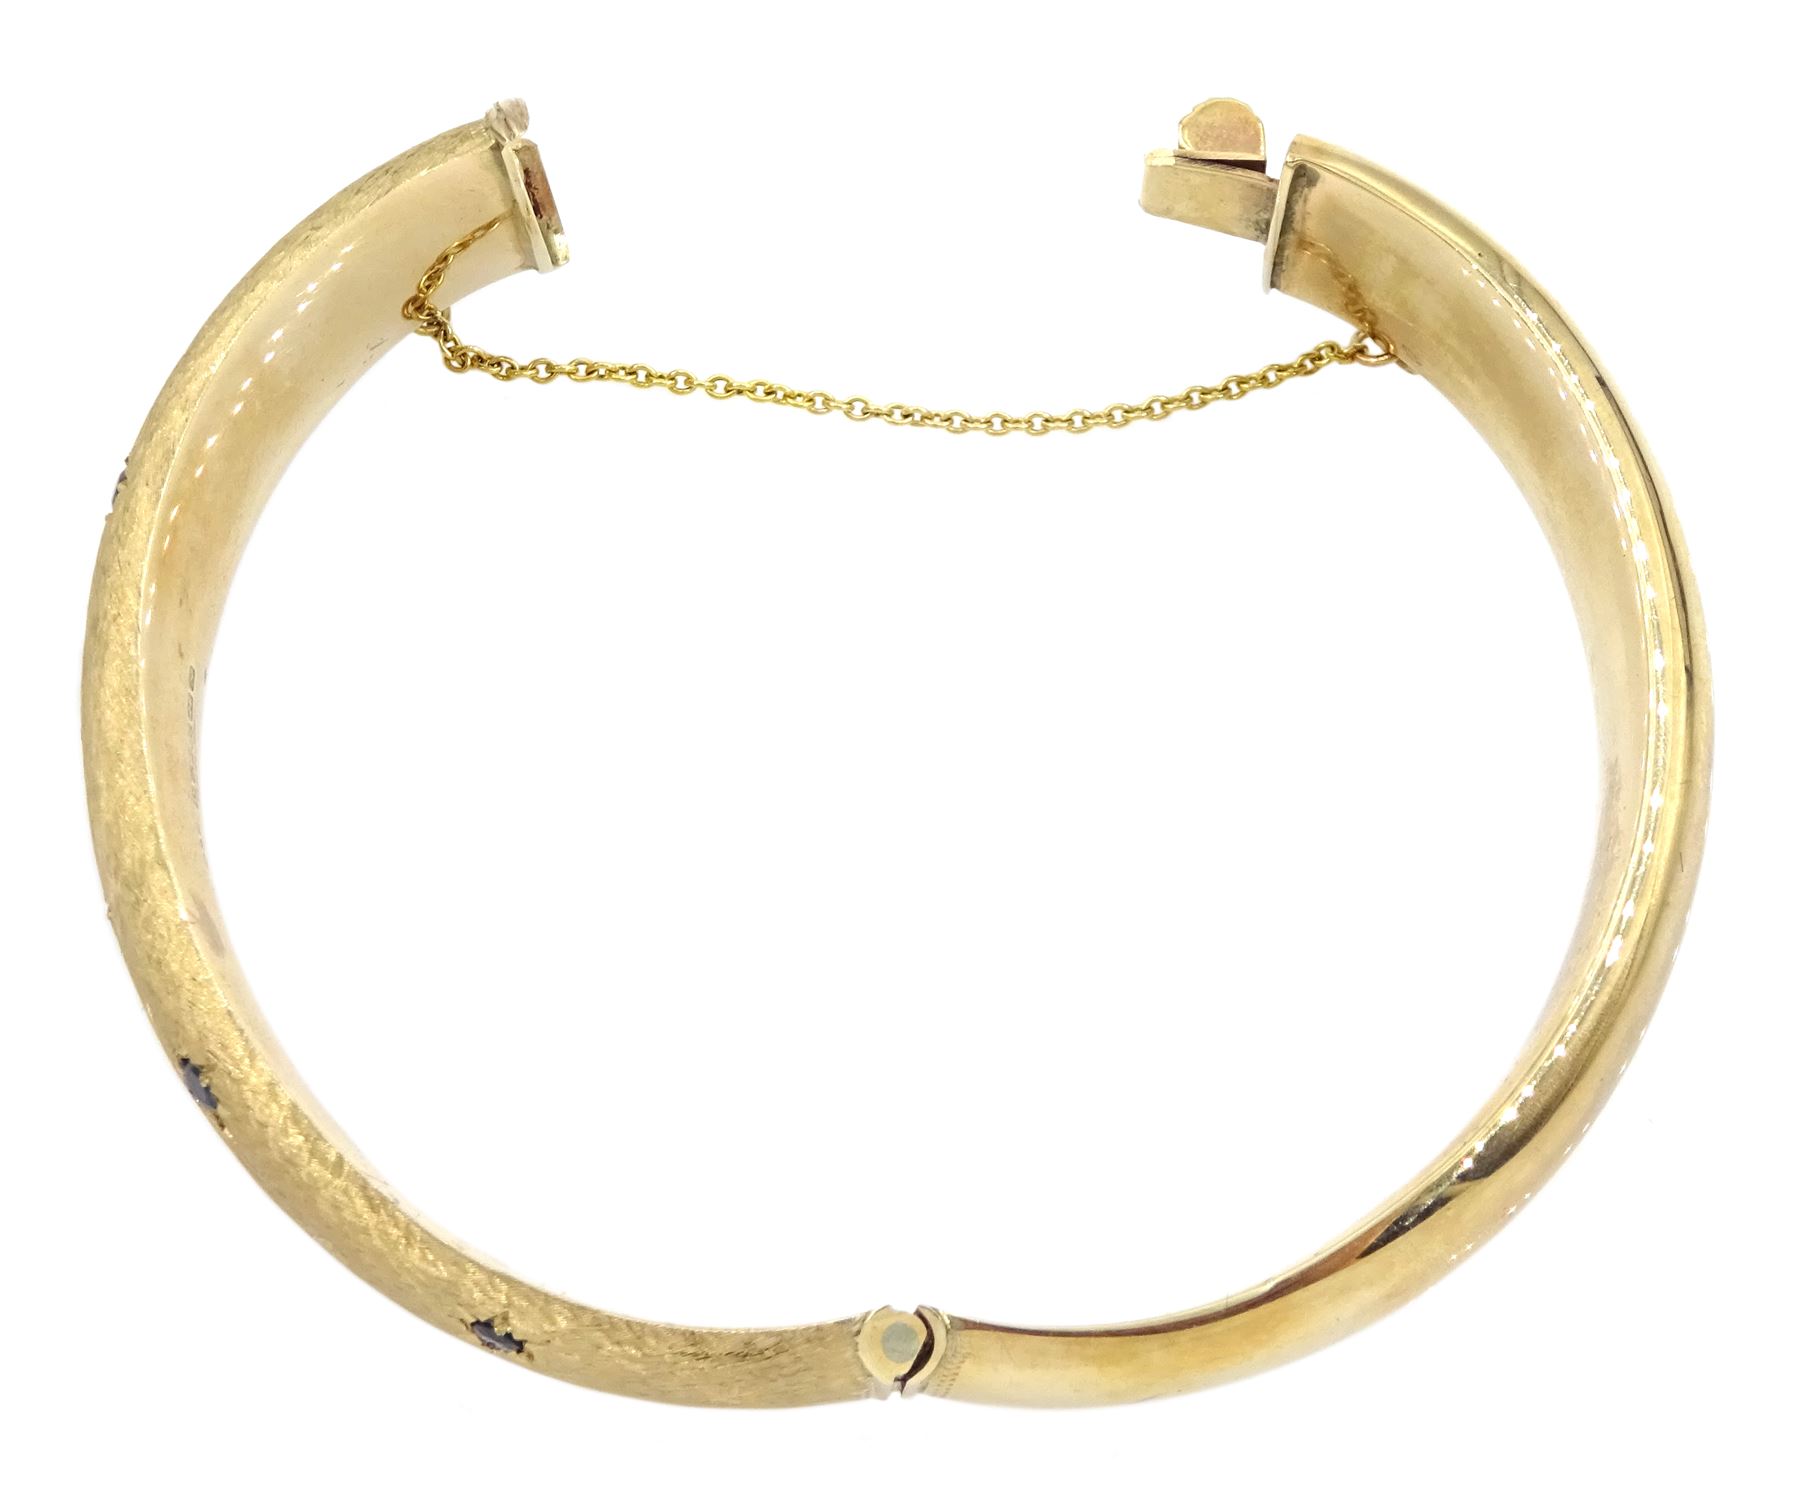 9ct textured and polished gold bangle, set with sapphires by Cropp ...